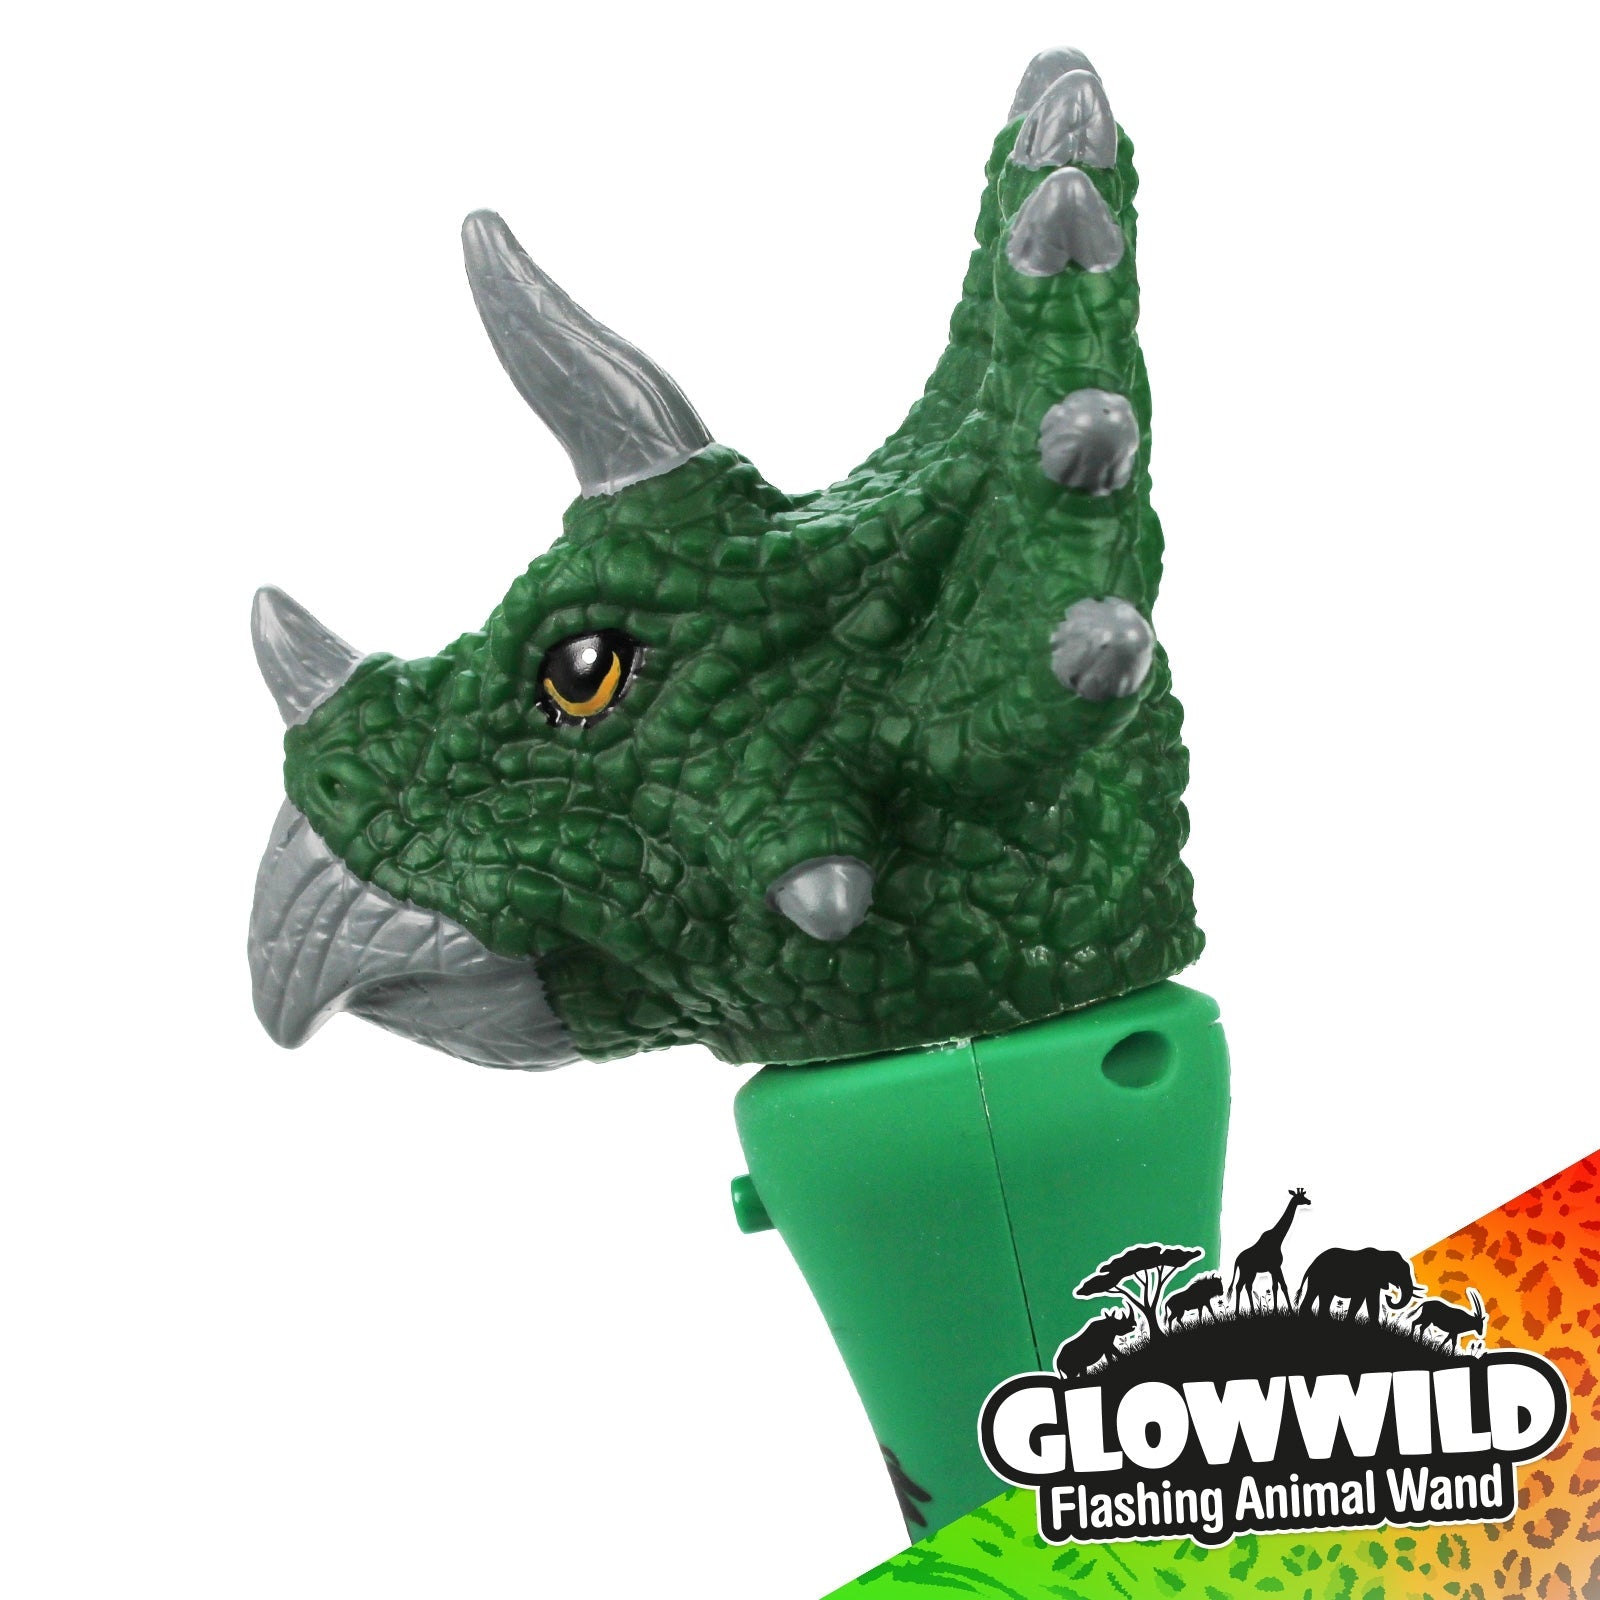 Triceratops Mini Light Up Animal Wand 7", Triceratops Mini Light Up Animal Wand 7" Description Bring Jurassic World to party time with this flashing dino wand topped with a triceratops head! Packed with colour change LEDs, this triceratops wand shines through a multi coloured light show with incredible flashing effects that will mesmerise! At 7" long, this Triceratops Mini Light Up Animal Wand is just the right size for younger party animals and it's simple on/of function make it easy to control. Glow Wild 